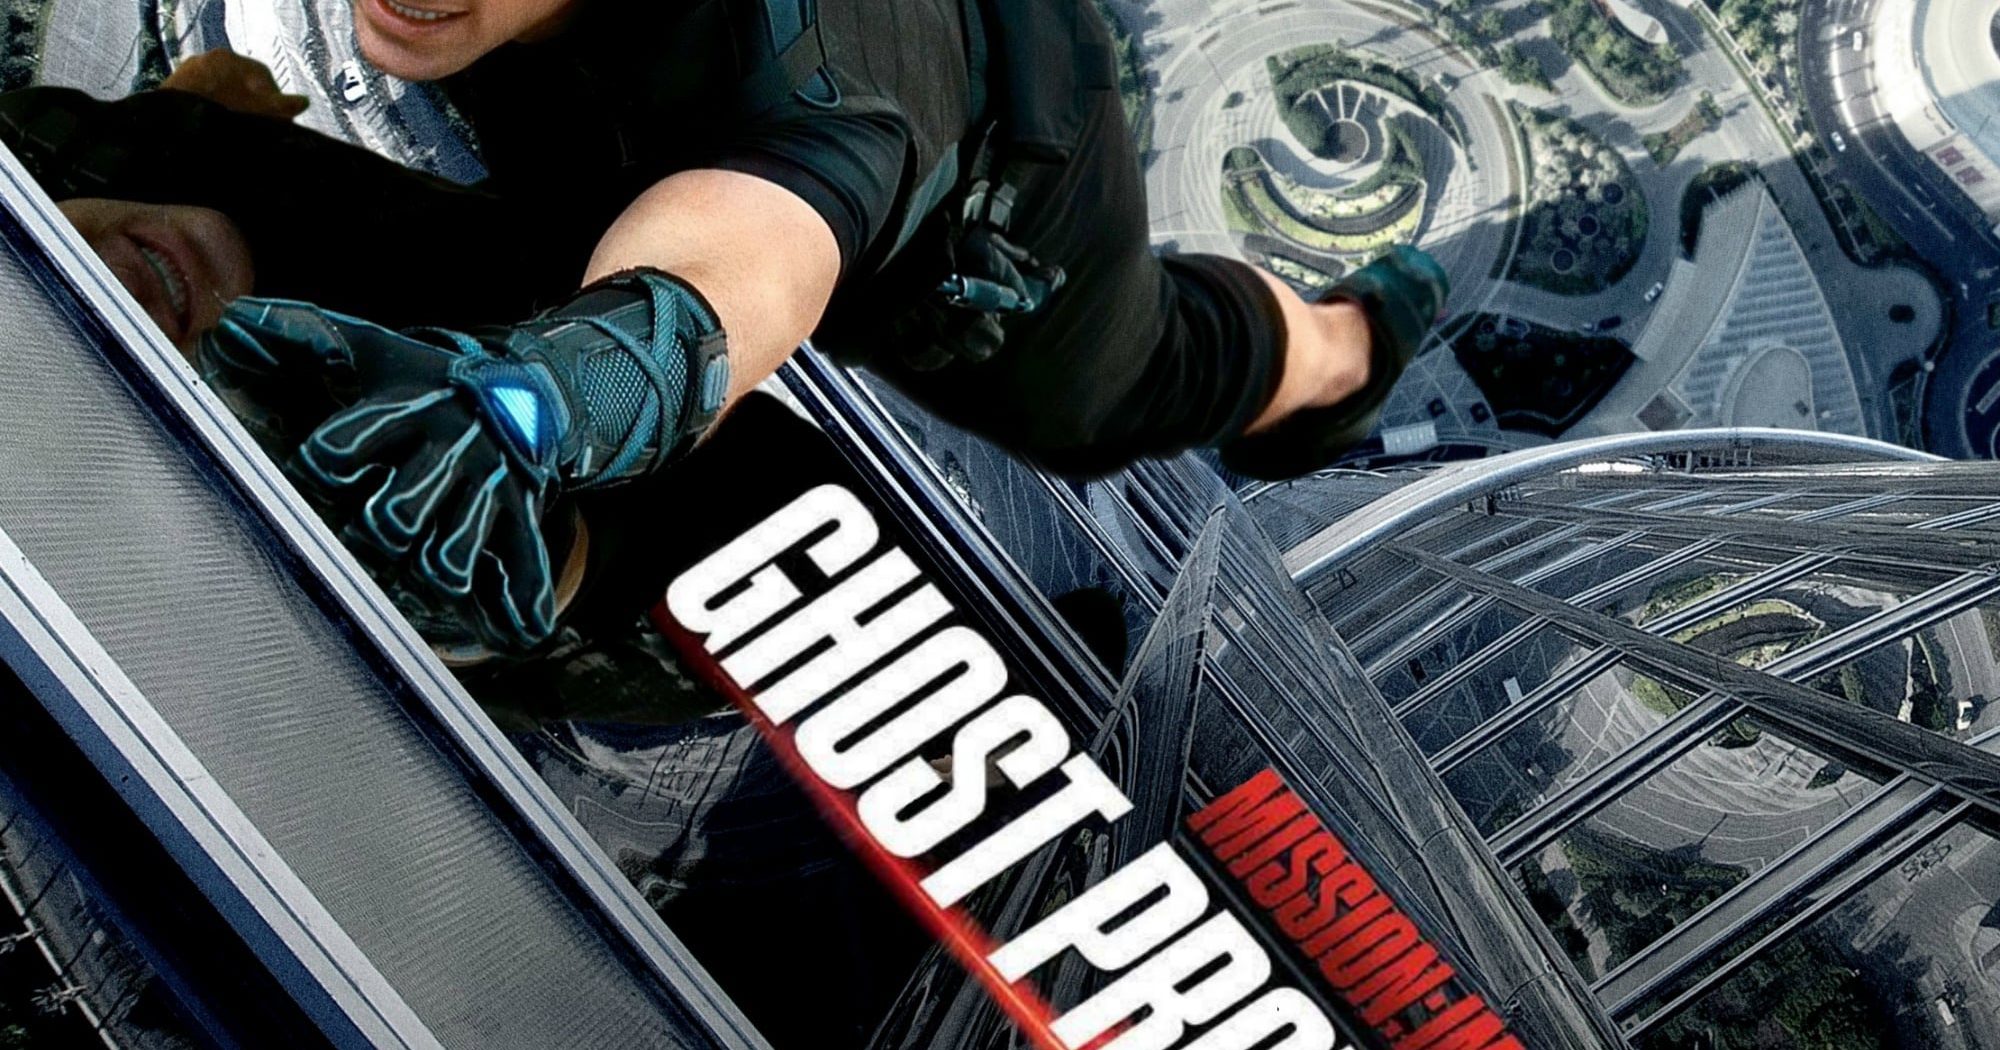 Poster for the movie "Mission: Impossible - Ghost Protocol"